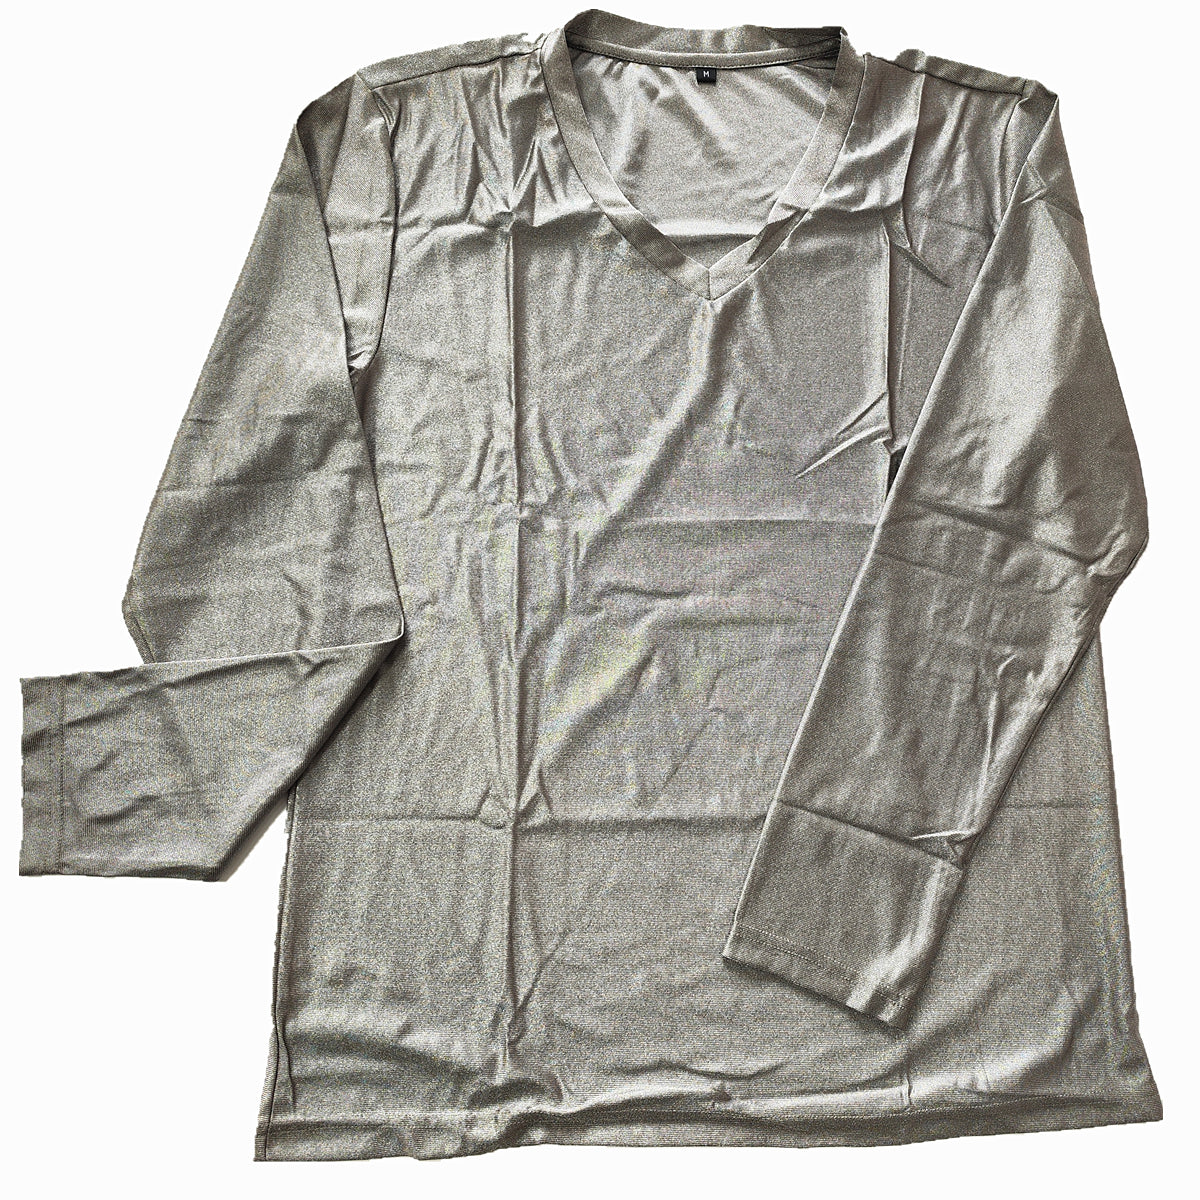 100% Silver Fiber Stretchable Fabric Radiation Protection Material